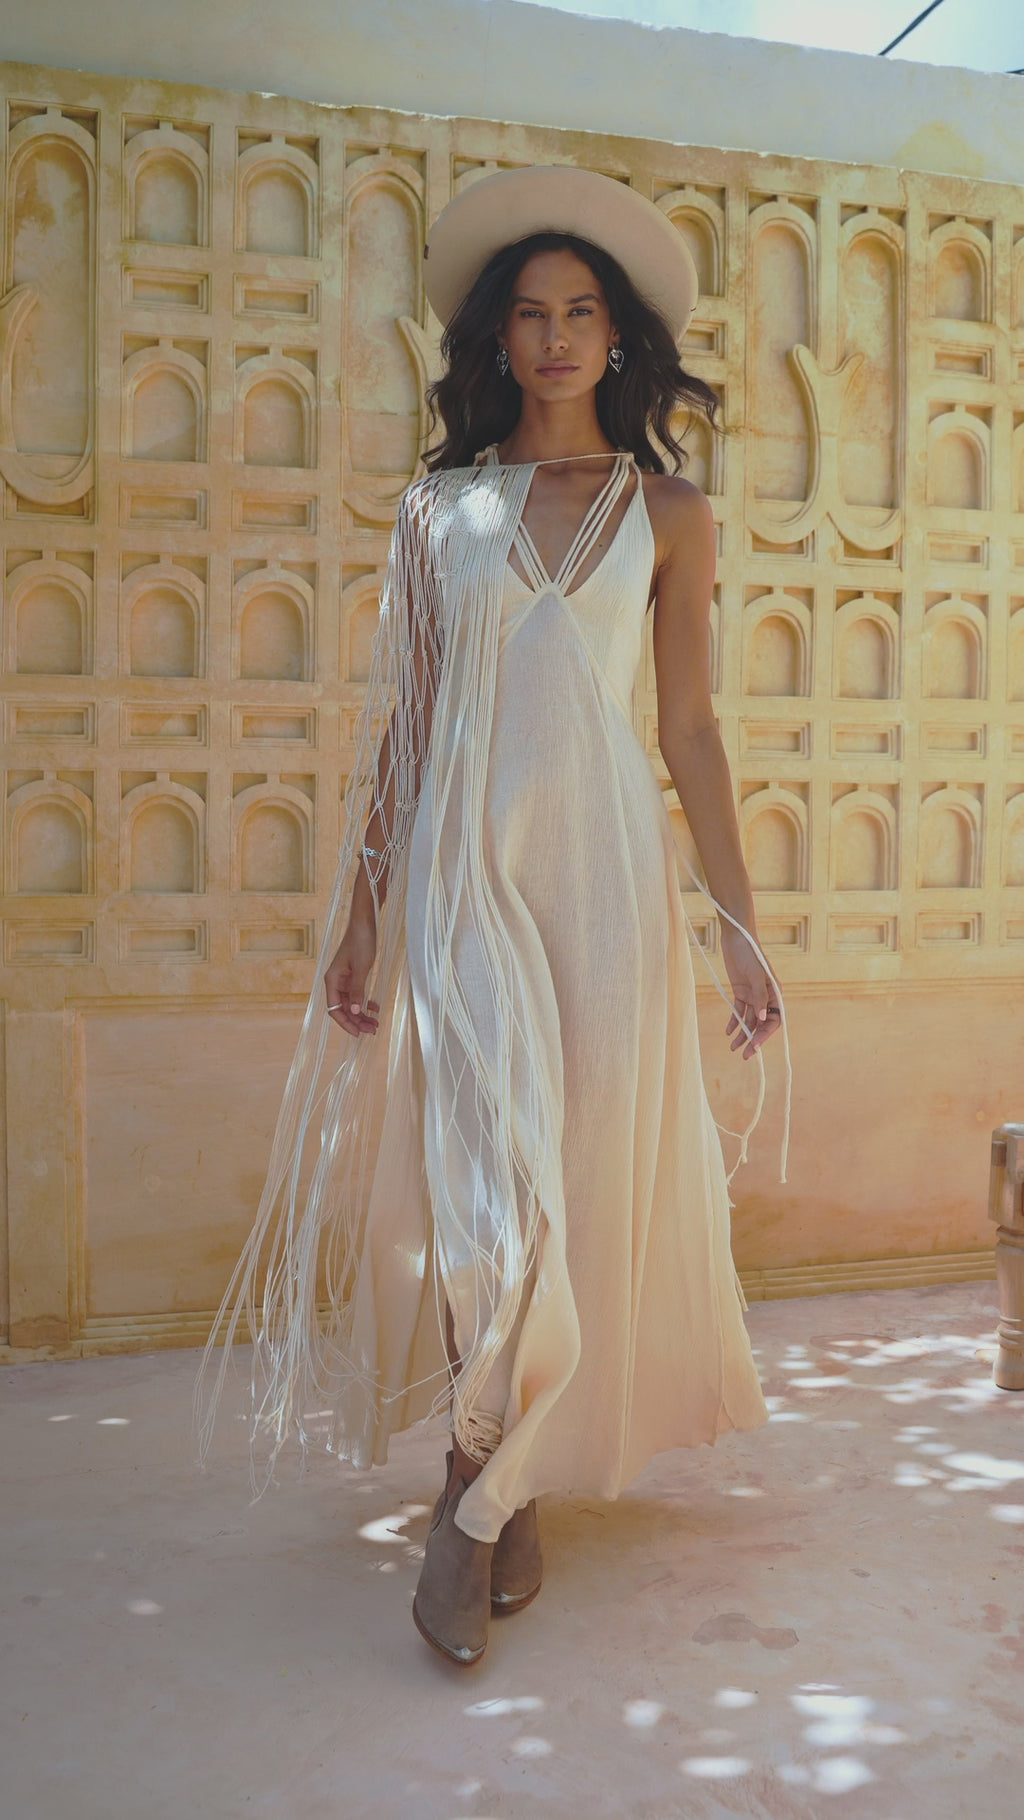 Off-White Boho Goddess Dress with handmade macramé design on the back, adjustable straps for fit, and decorative slits on the front. Made from 50% Linen and 50% Cotton.